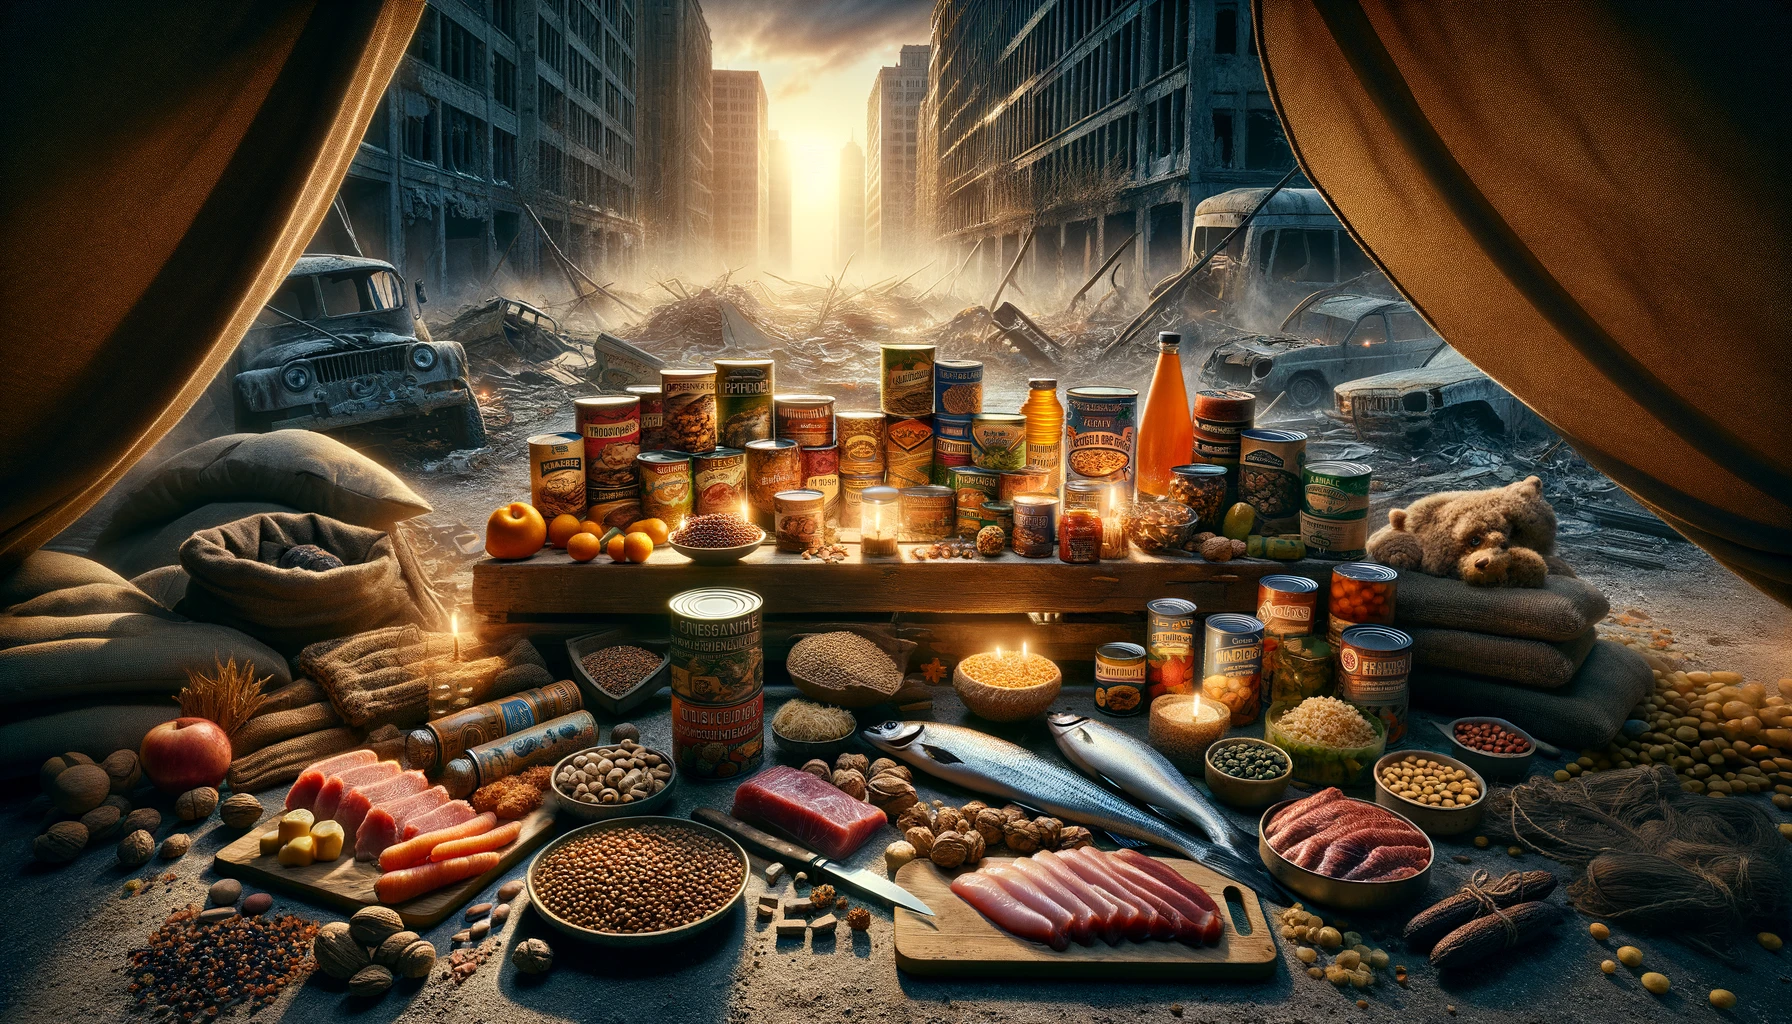 Post-apocalyptic survival scene with nutrient-dense foods and makeshift shelter, emphasizing preppers' resilience and preparedness, set in a devastated urban landscape with dramatic lighting and a focus on survival instinct